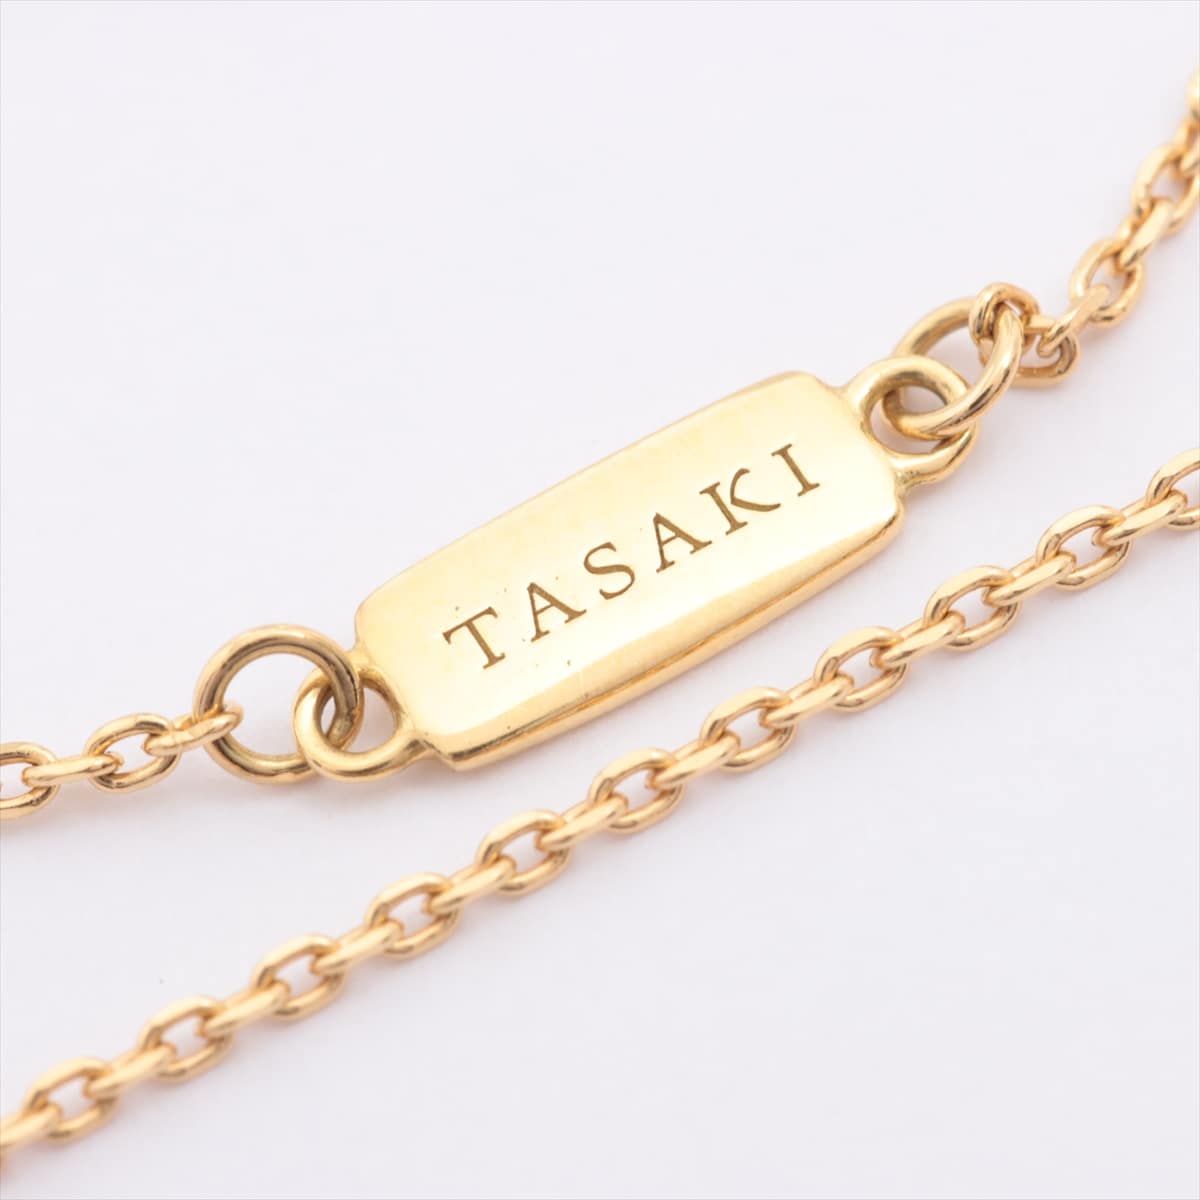 TASAKI Refined Rebellion horns Pearl Charm Necklace 750(YG) 3.3g about 4.0mm